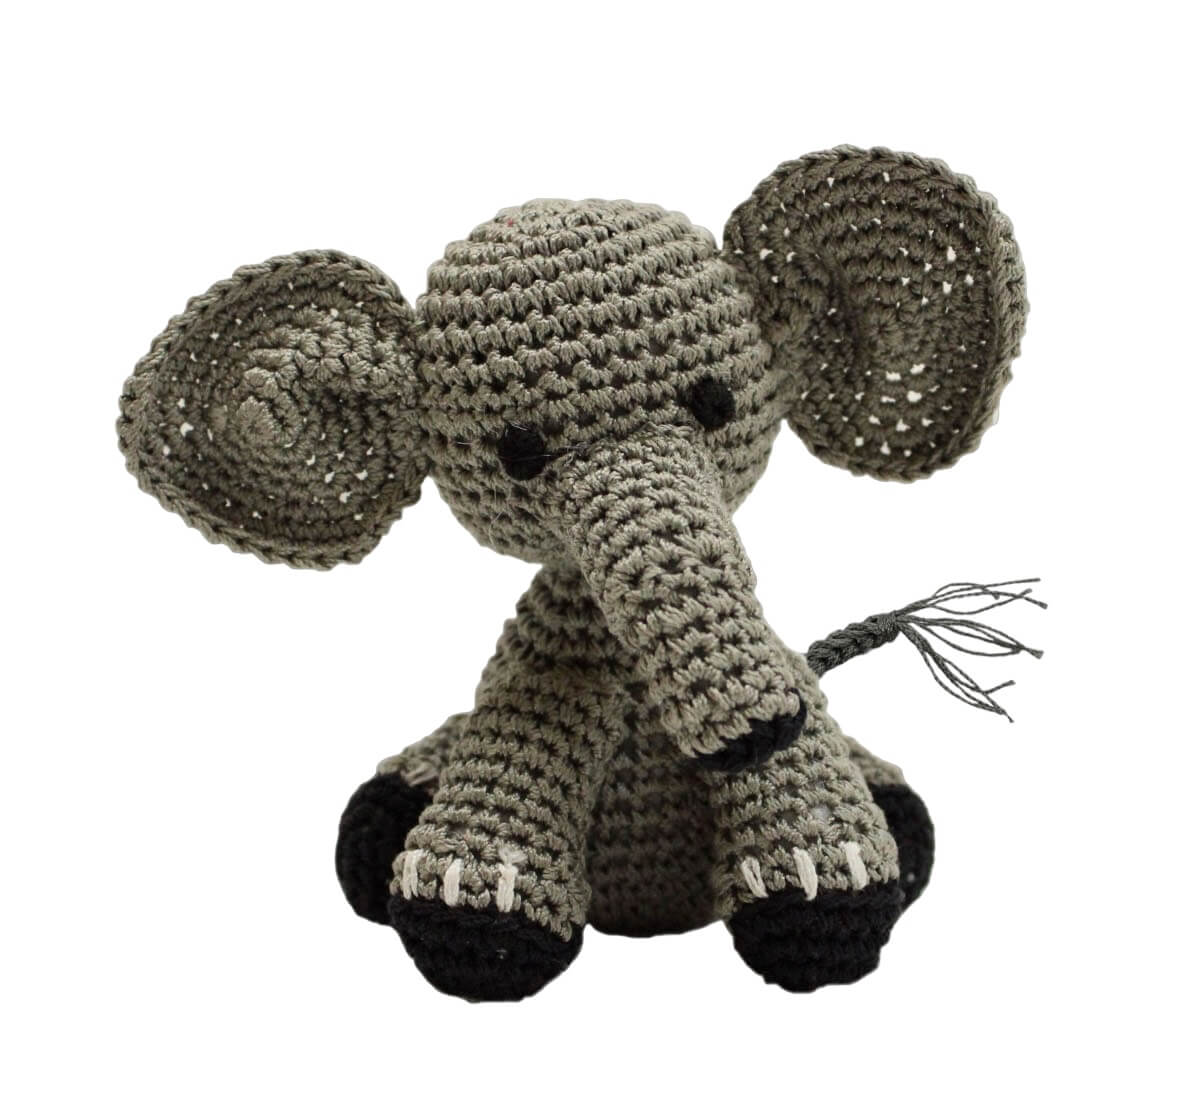 Knit Knacks &quot;Bubbles the Baby Elephant&quot; handmade organic cotton dog toy.  Gray elephant with big, round ears, a trunk, and a fringed tail.